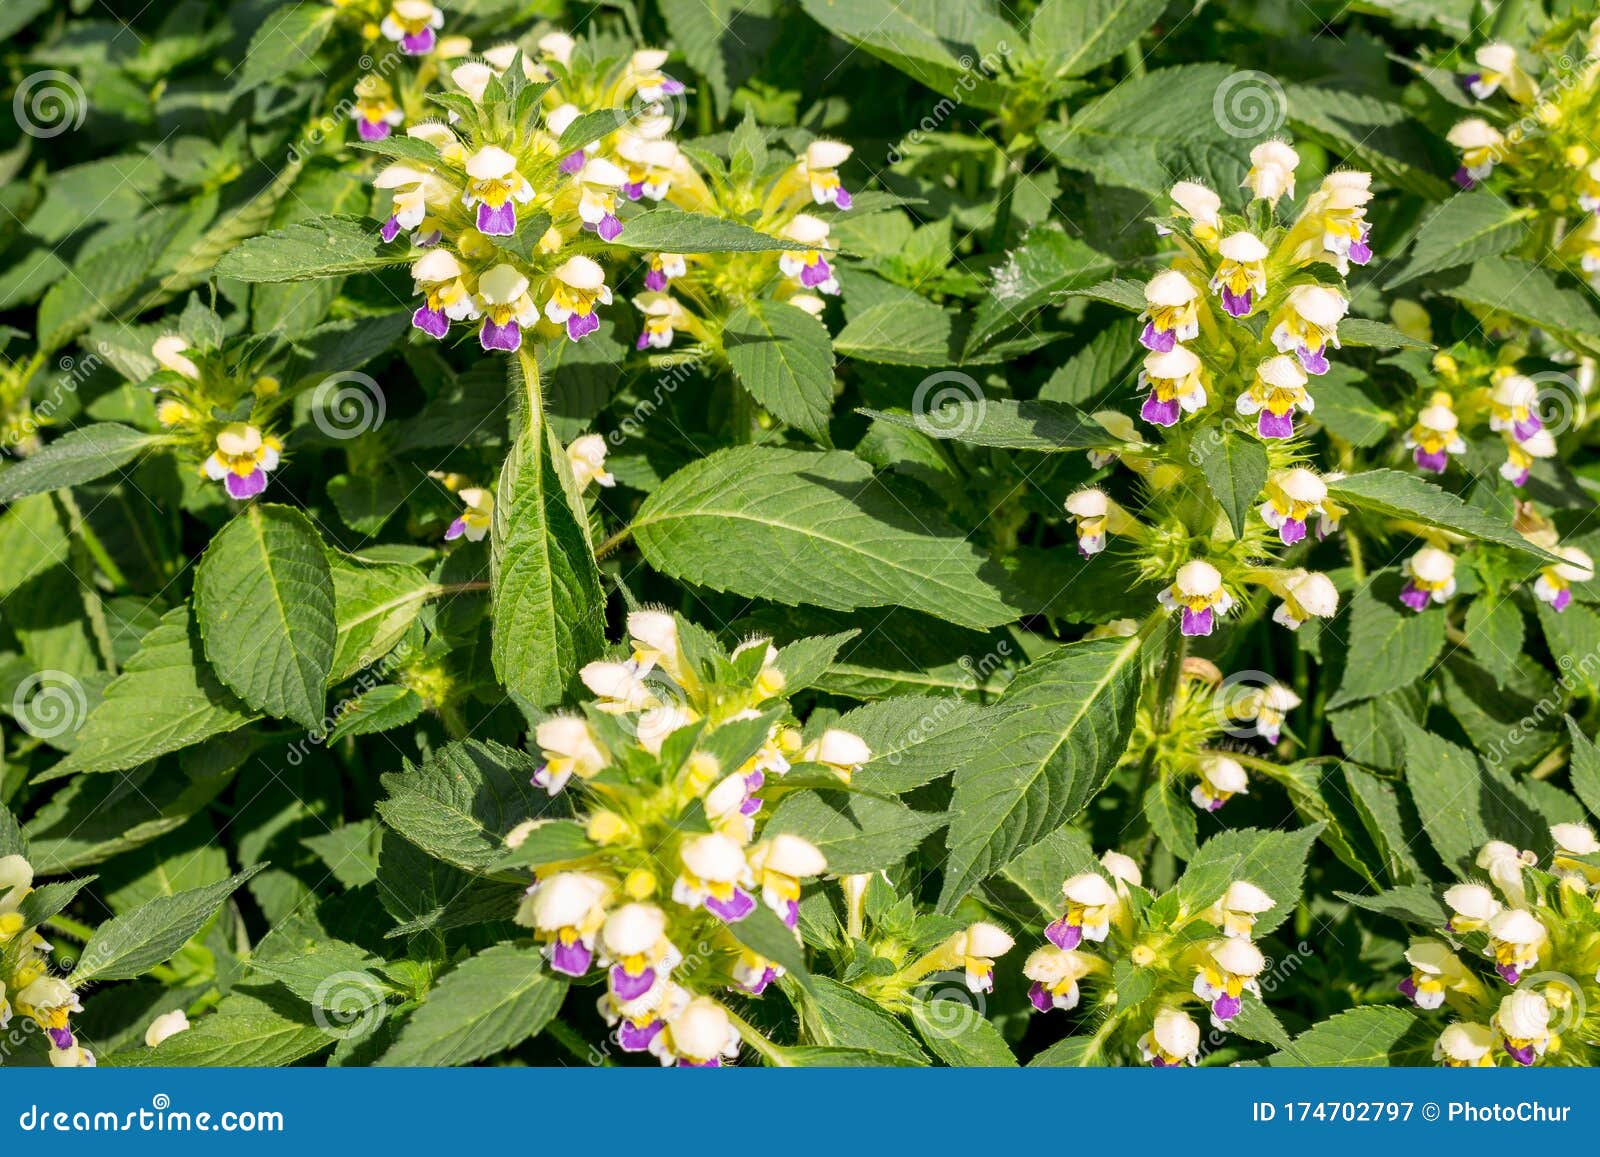 thickets of plants large-flowered hemp-nettle